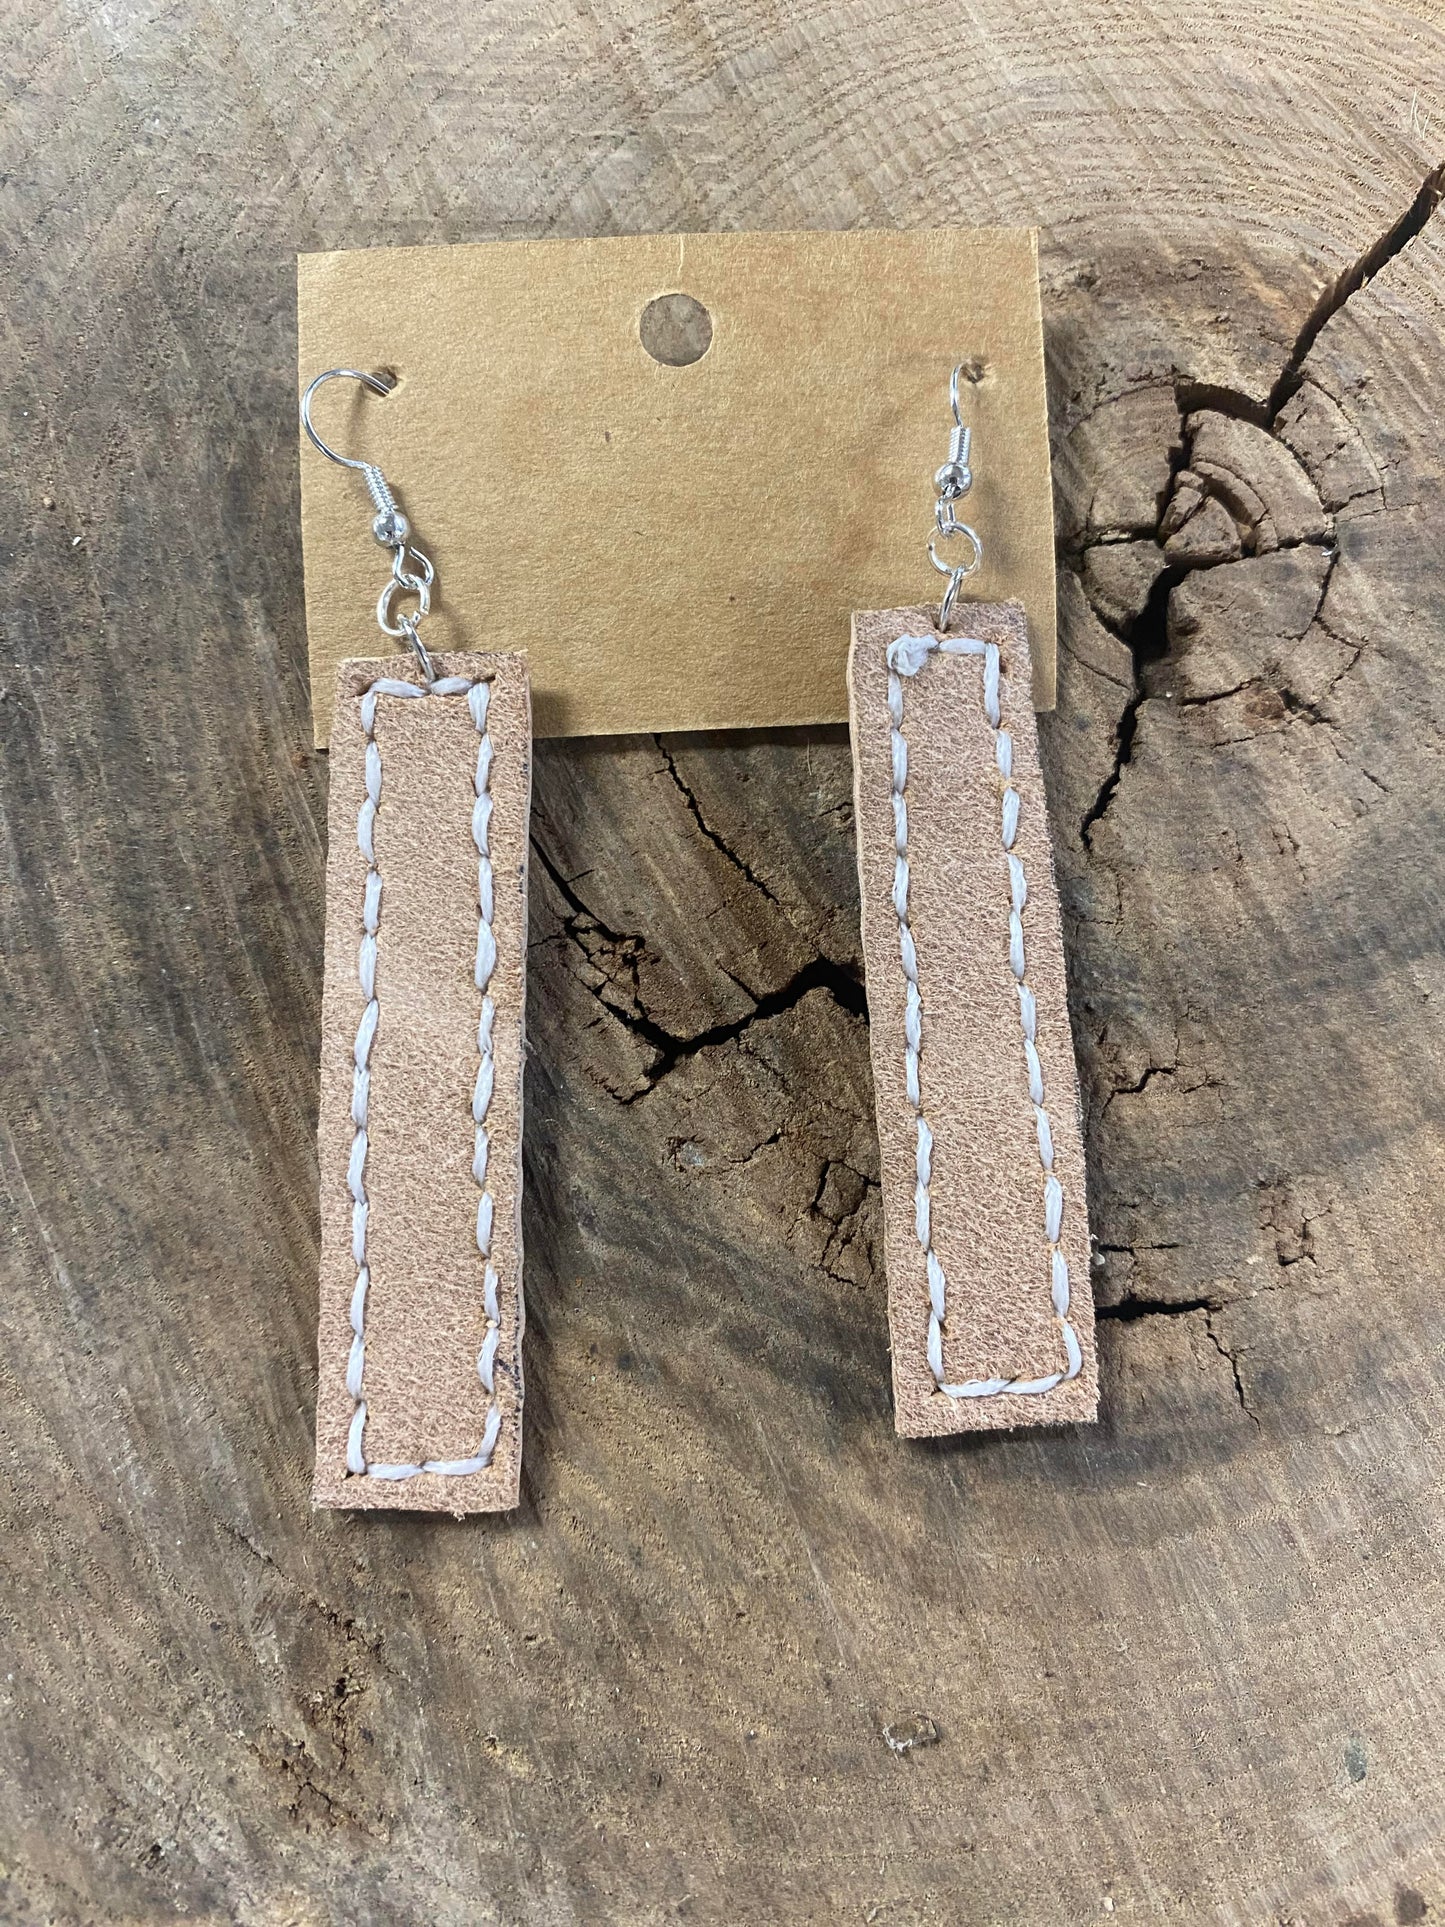 Hand Stitched Light Leather Bar Earrings